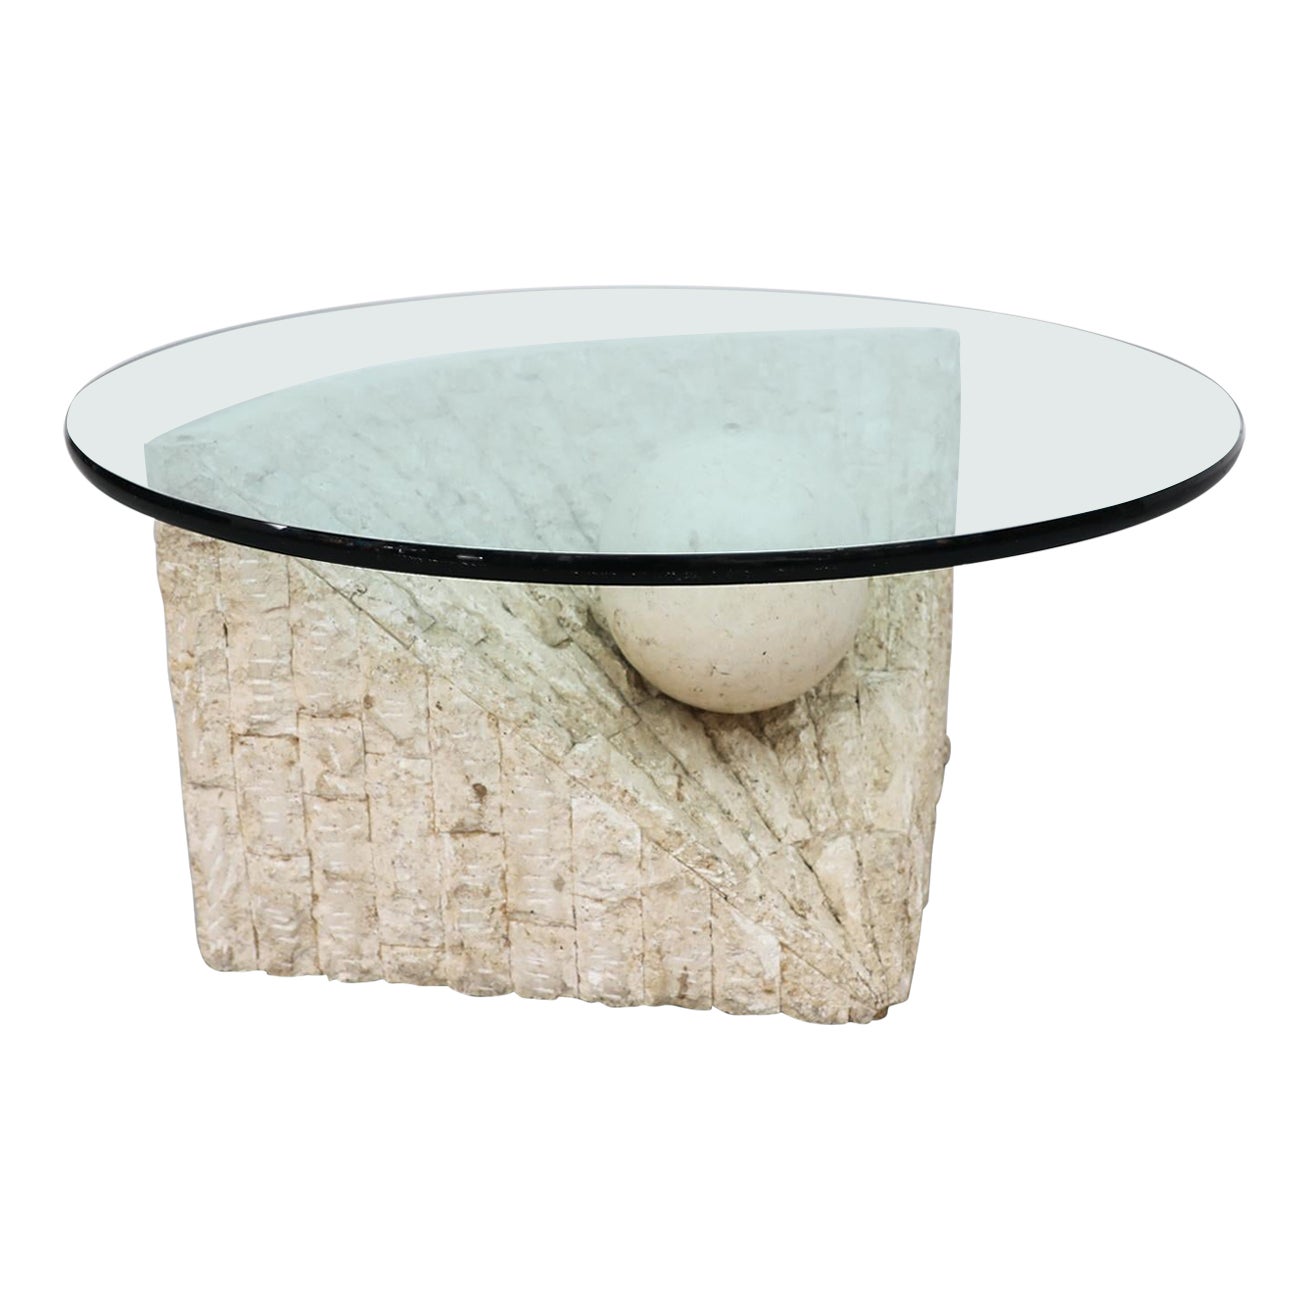 Post-Modern Tessellated Stone Coffee Table with Glass by Magnussen Ponte, 1995 For Sale